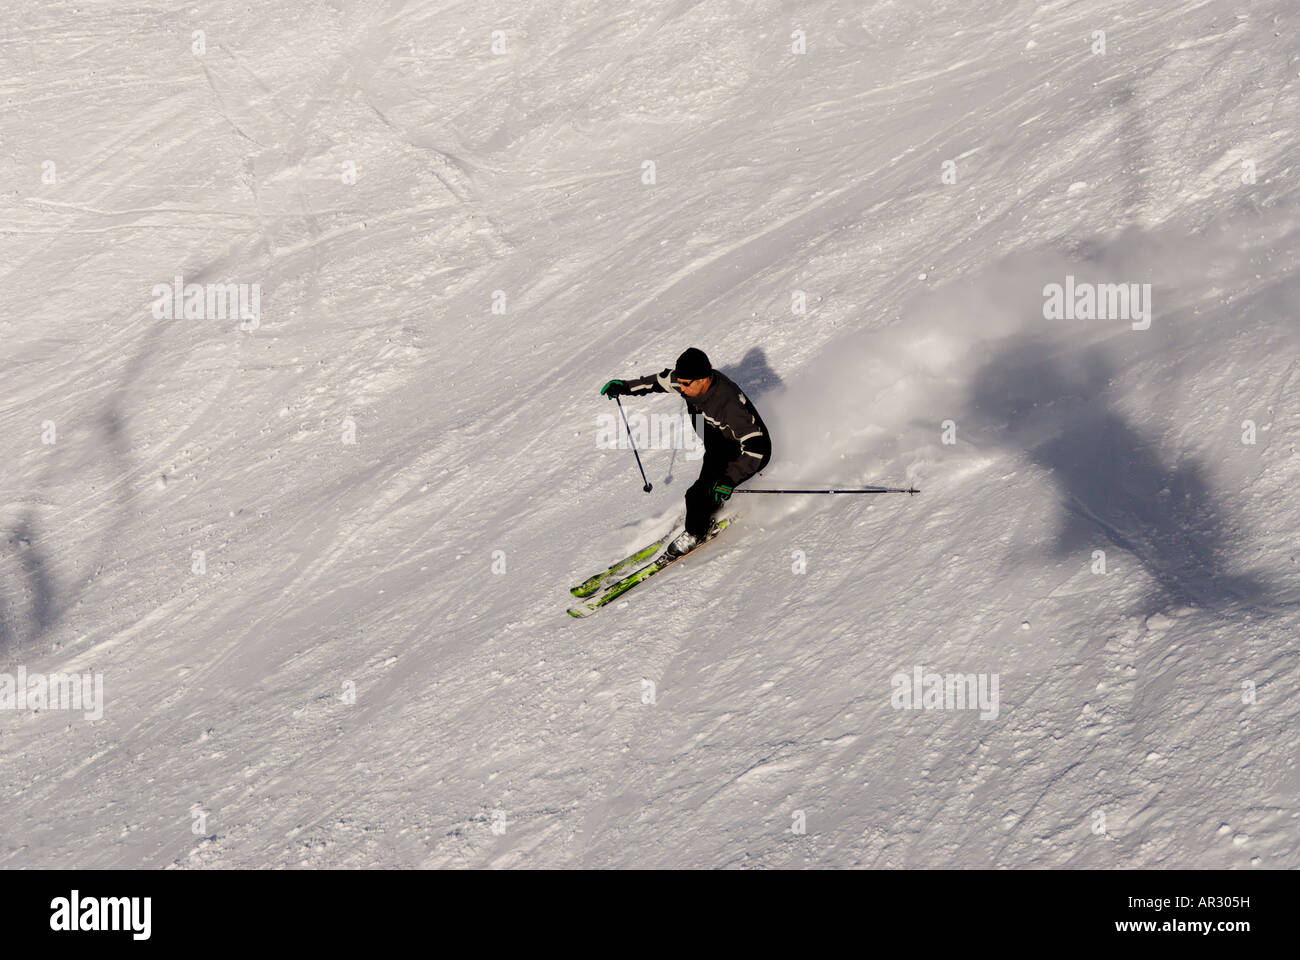 Downhill skiing in the french alps with a chair lift in the shot Stock Photo